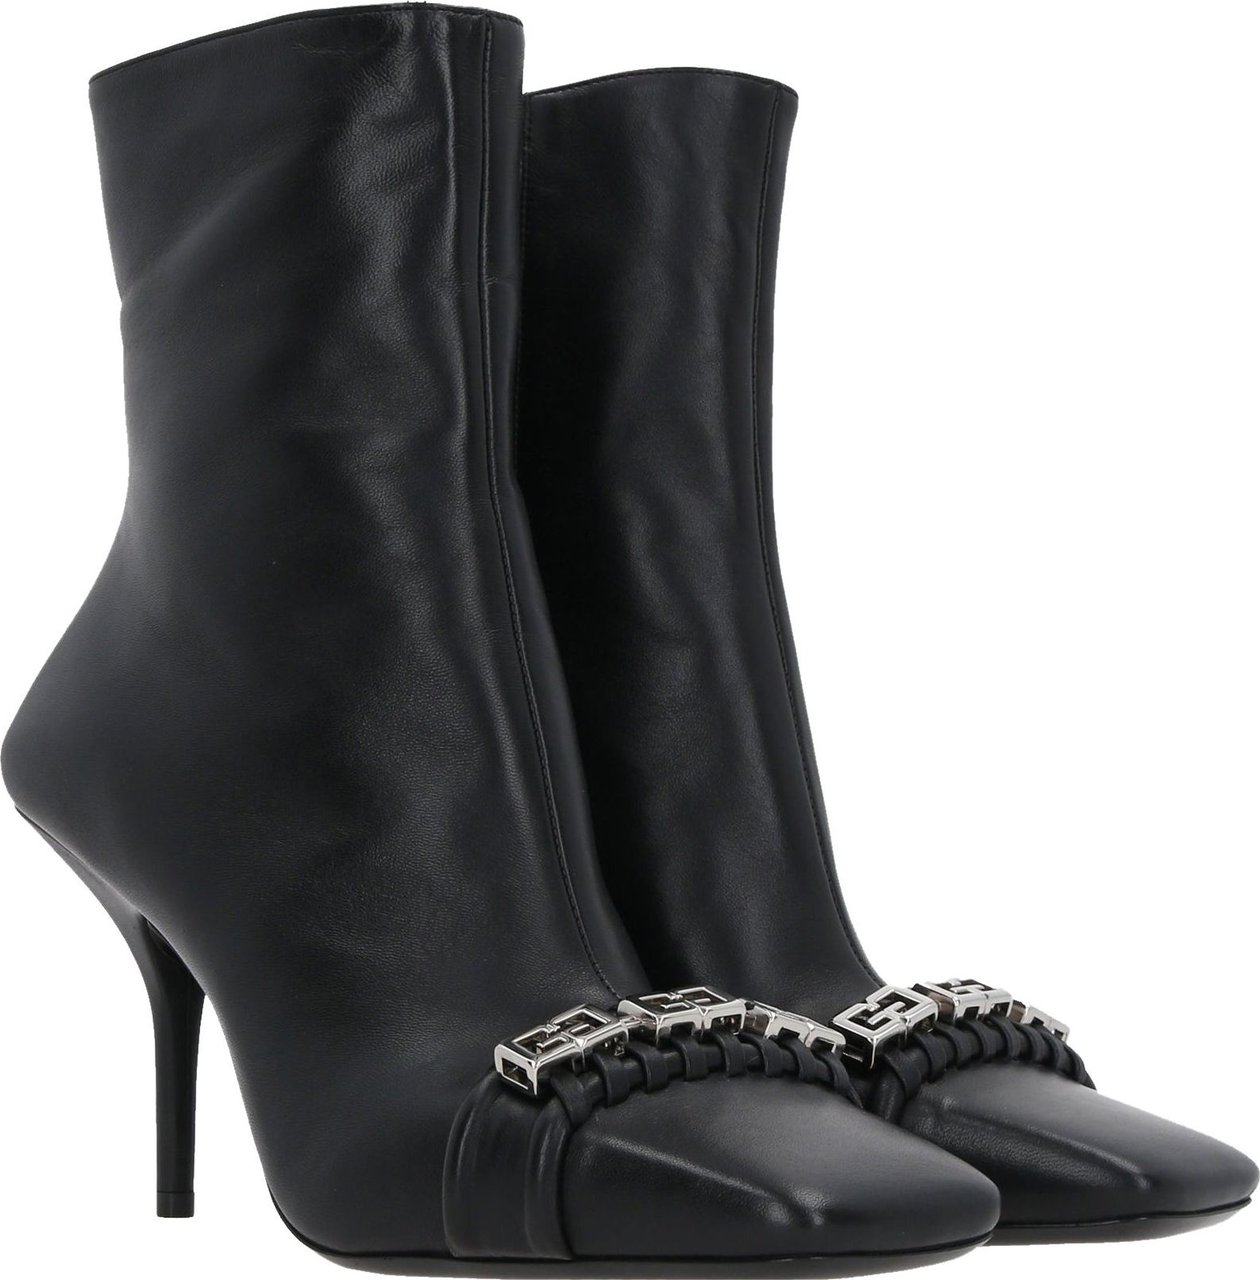 Givenchy Givenchy Leather Boots Zwart